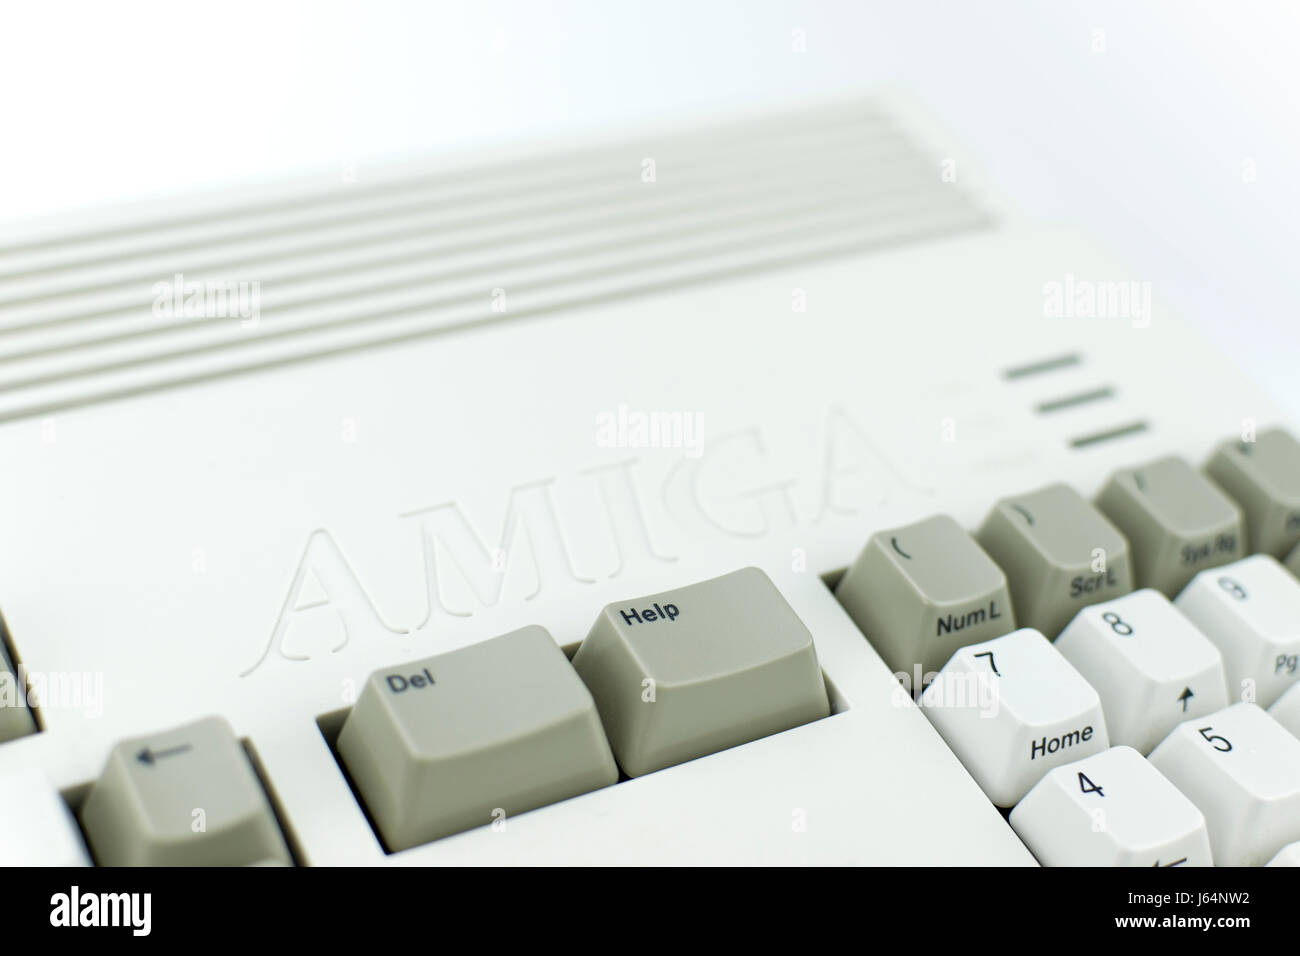 Top view of an Amiga 1200 with Help key Stock Photo